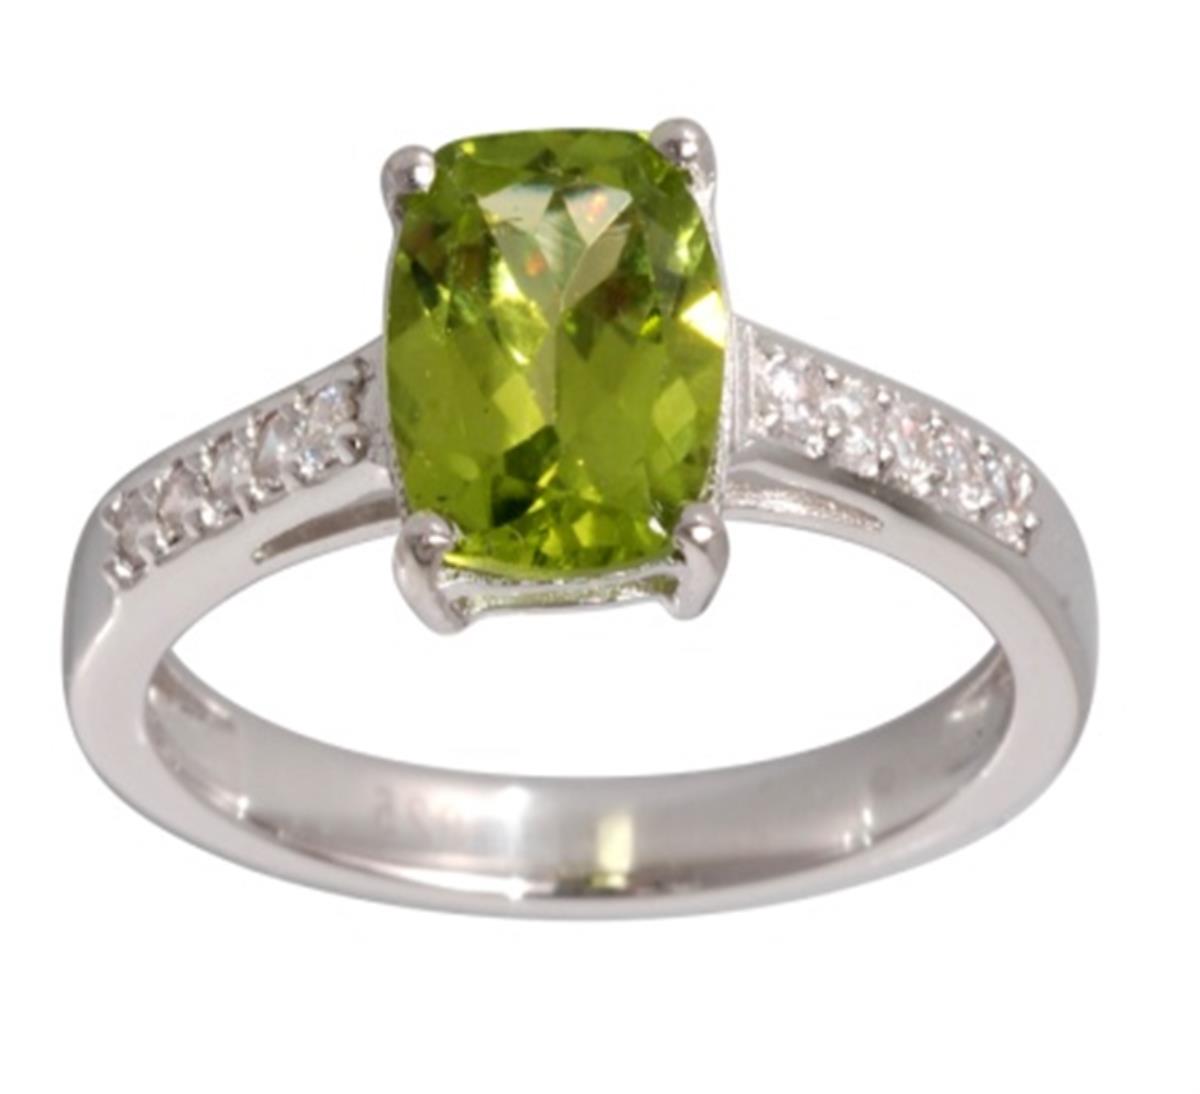 Sterling Silver Rhodium 9x7mm Cushion Cut Peridot with Paved White Zircon Sides Engagement Ring